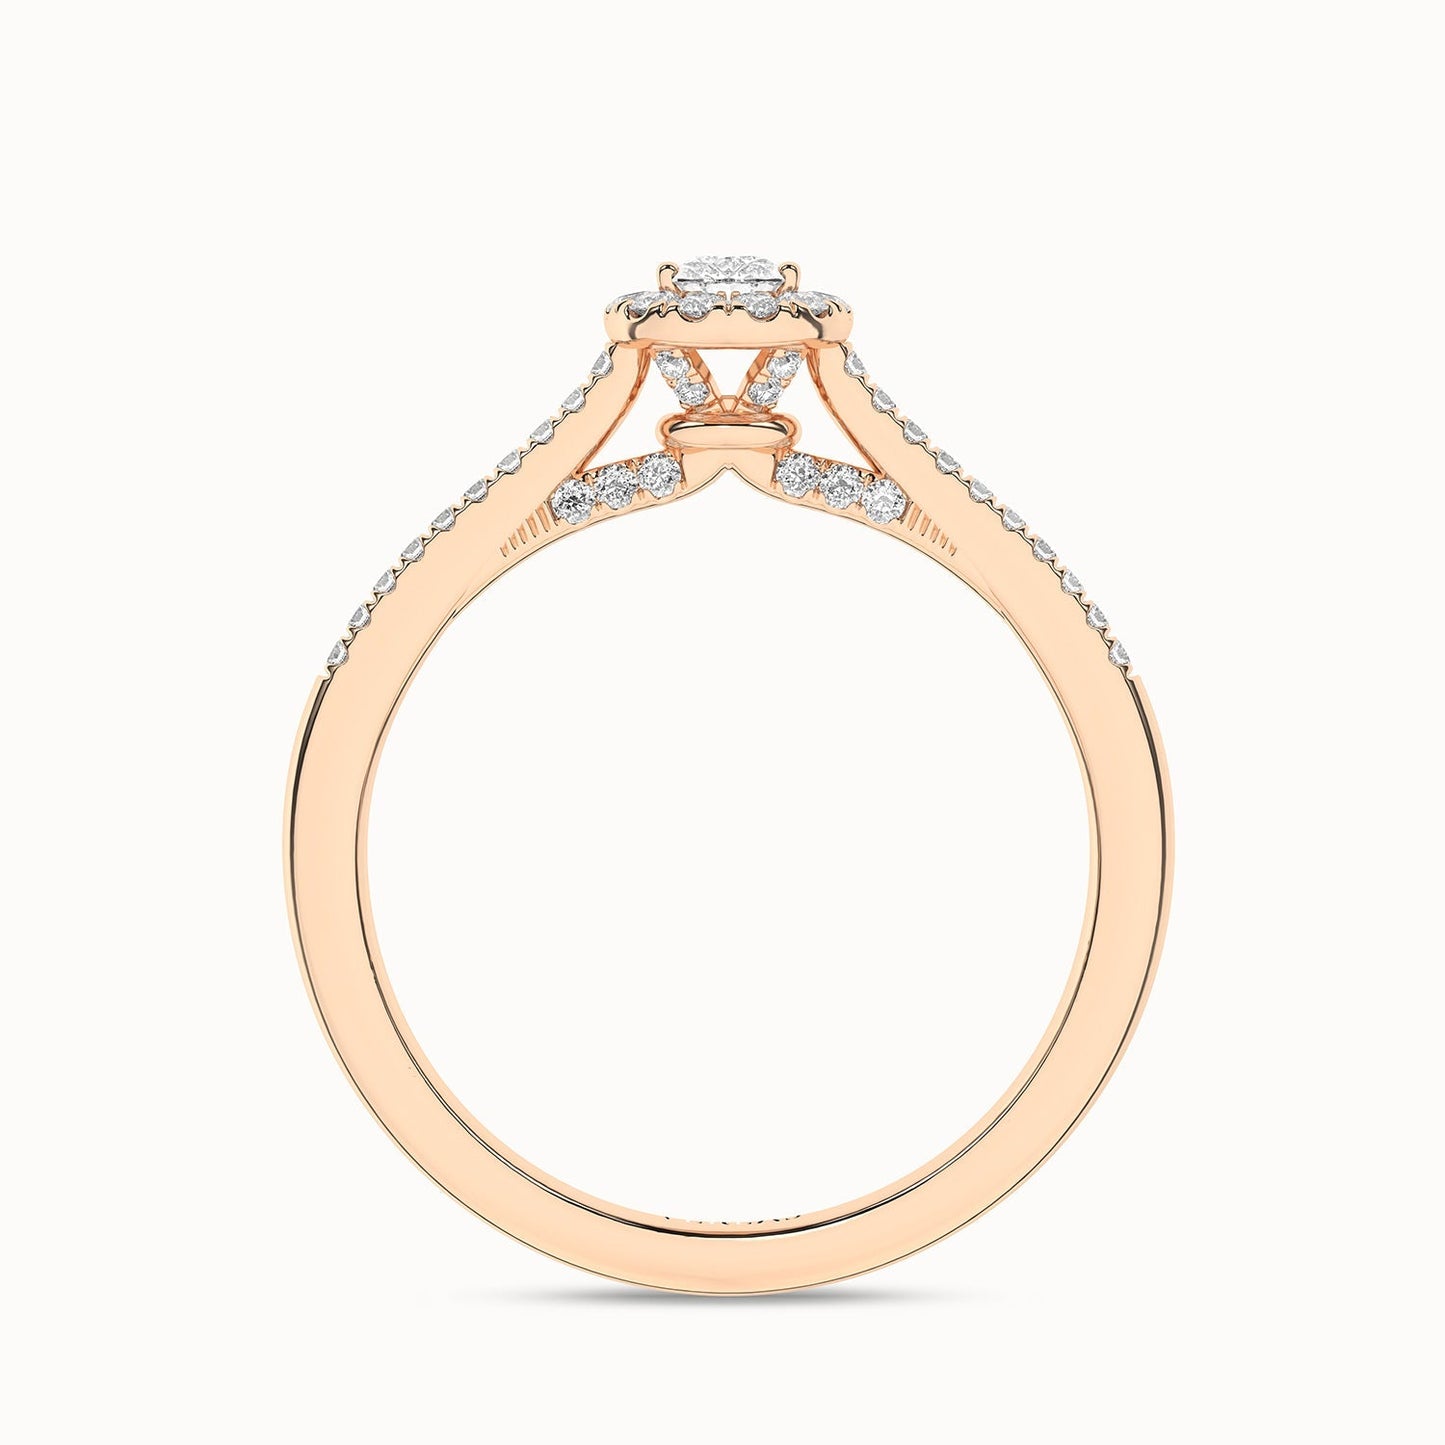 Signature Dewdrop Halo Ring_Product Angle_1/3Ct - 2